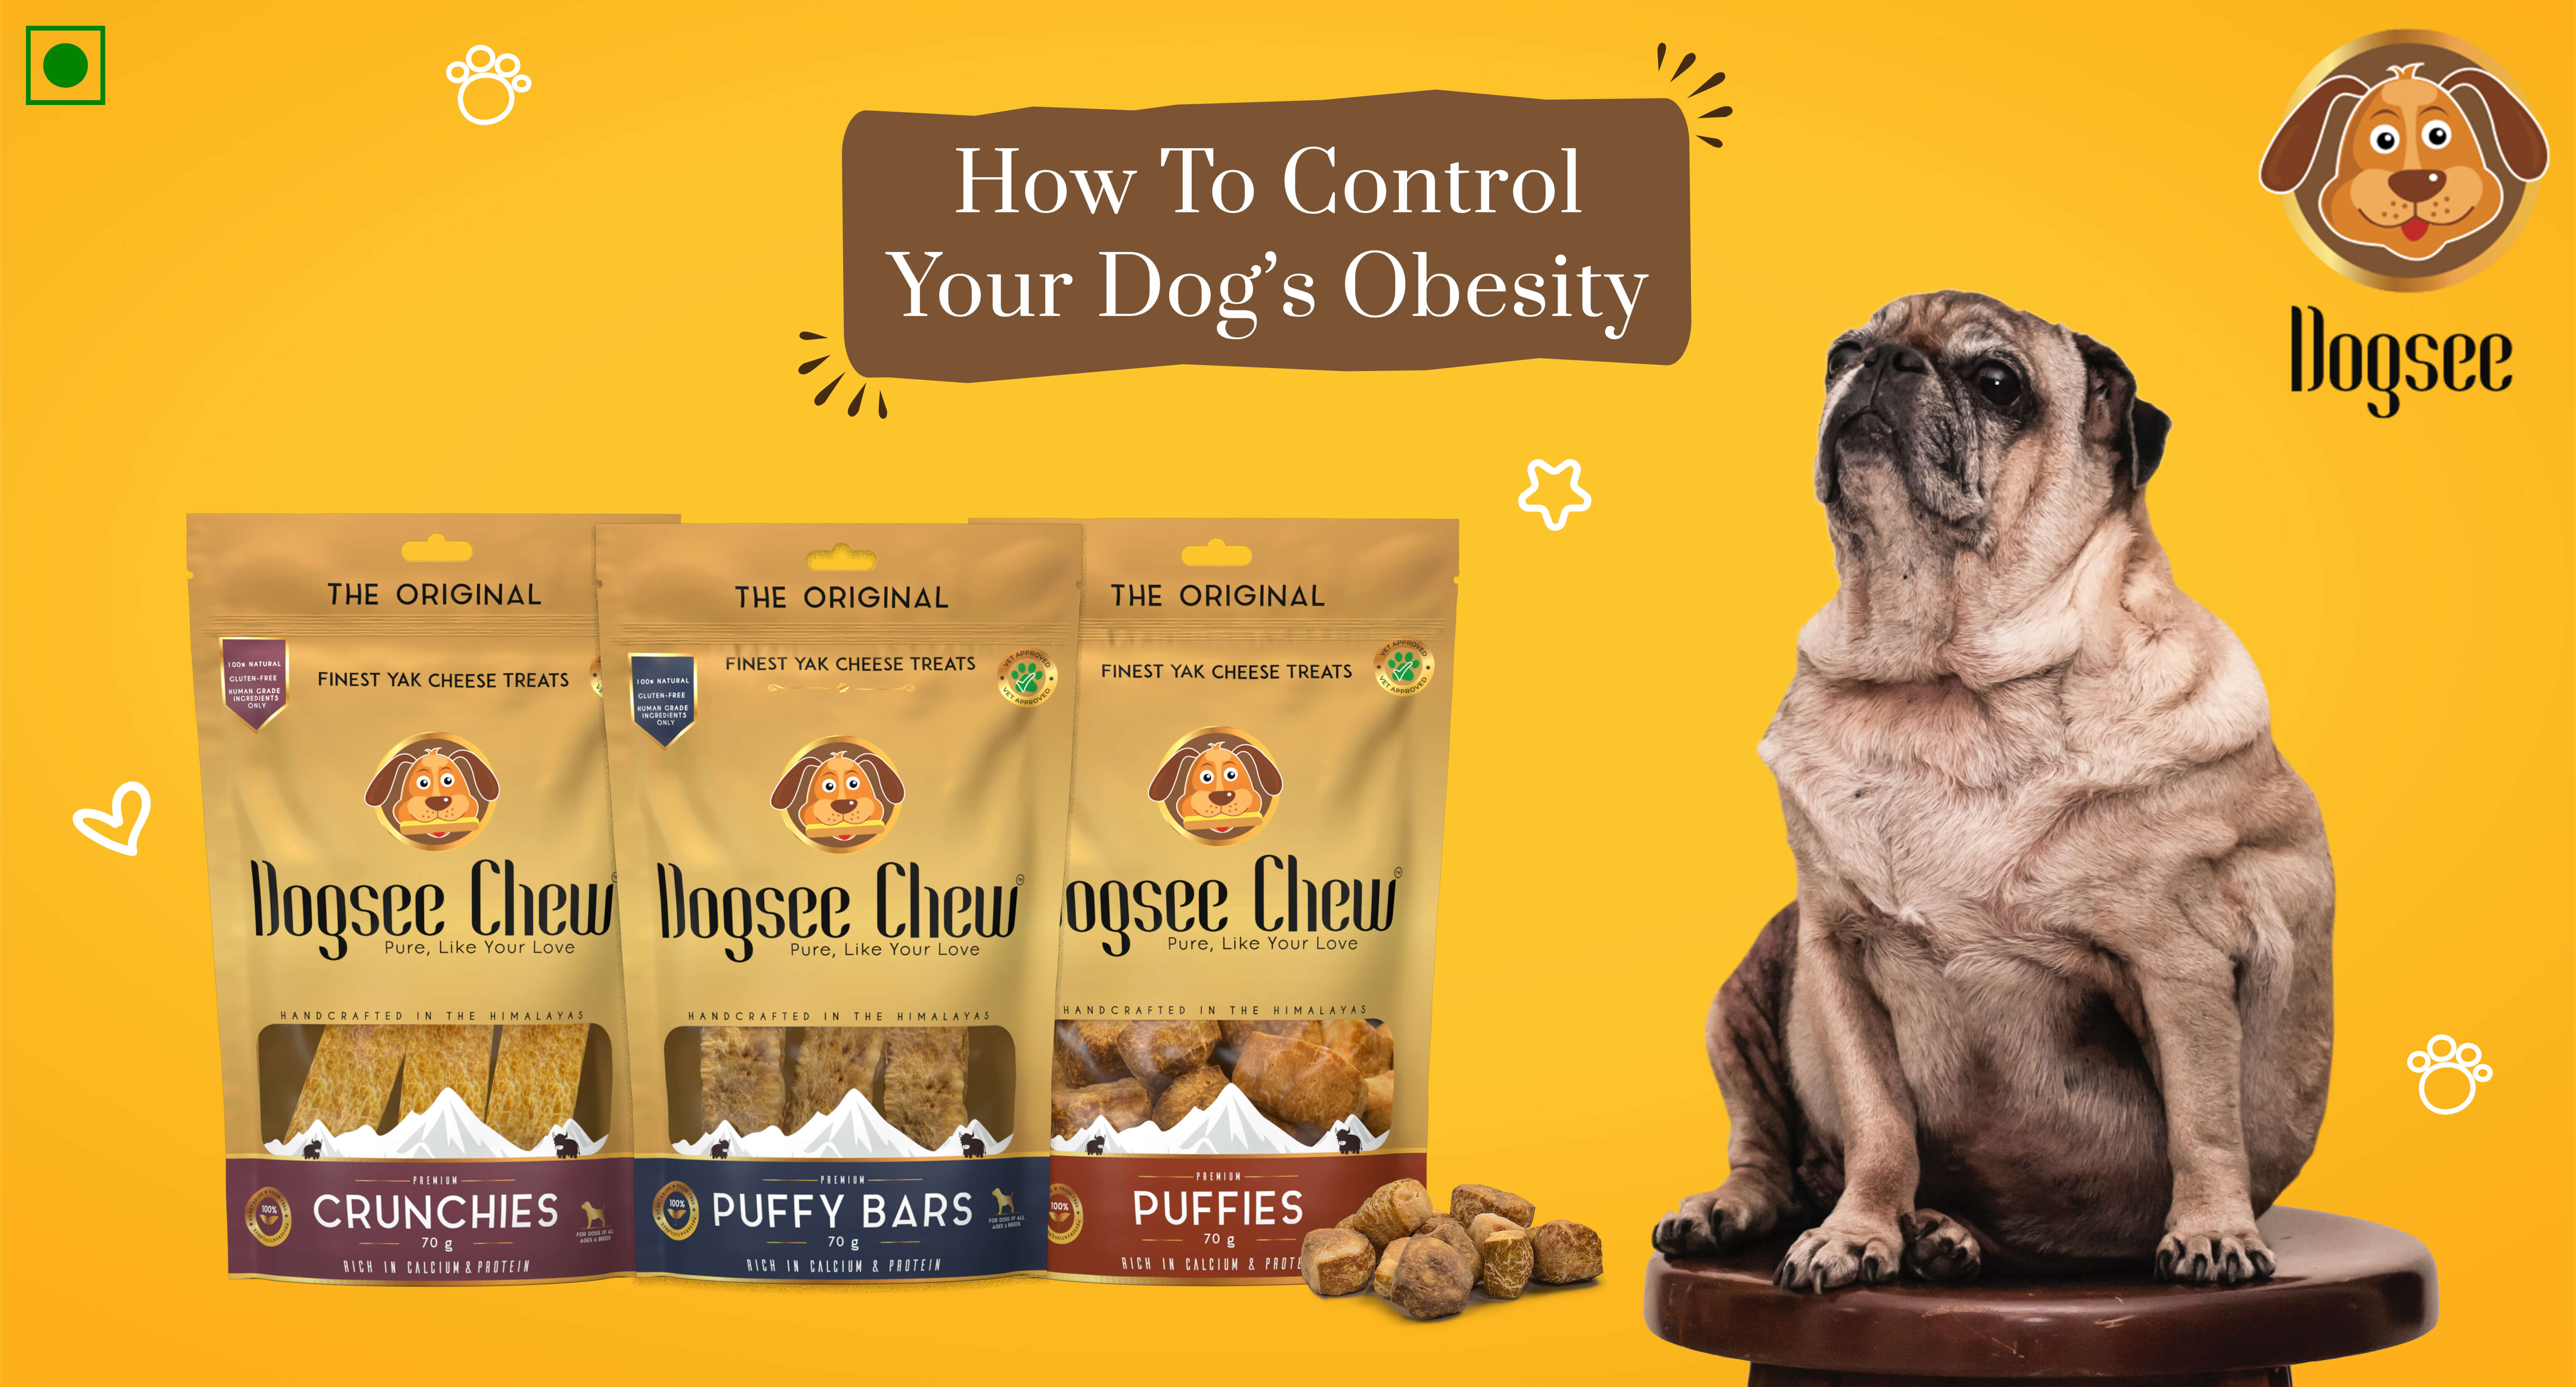 How To Control Your Dog’s Obesity